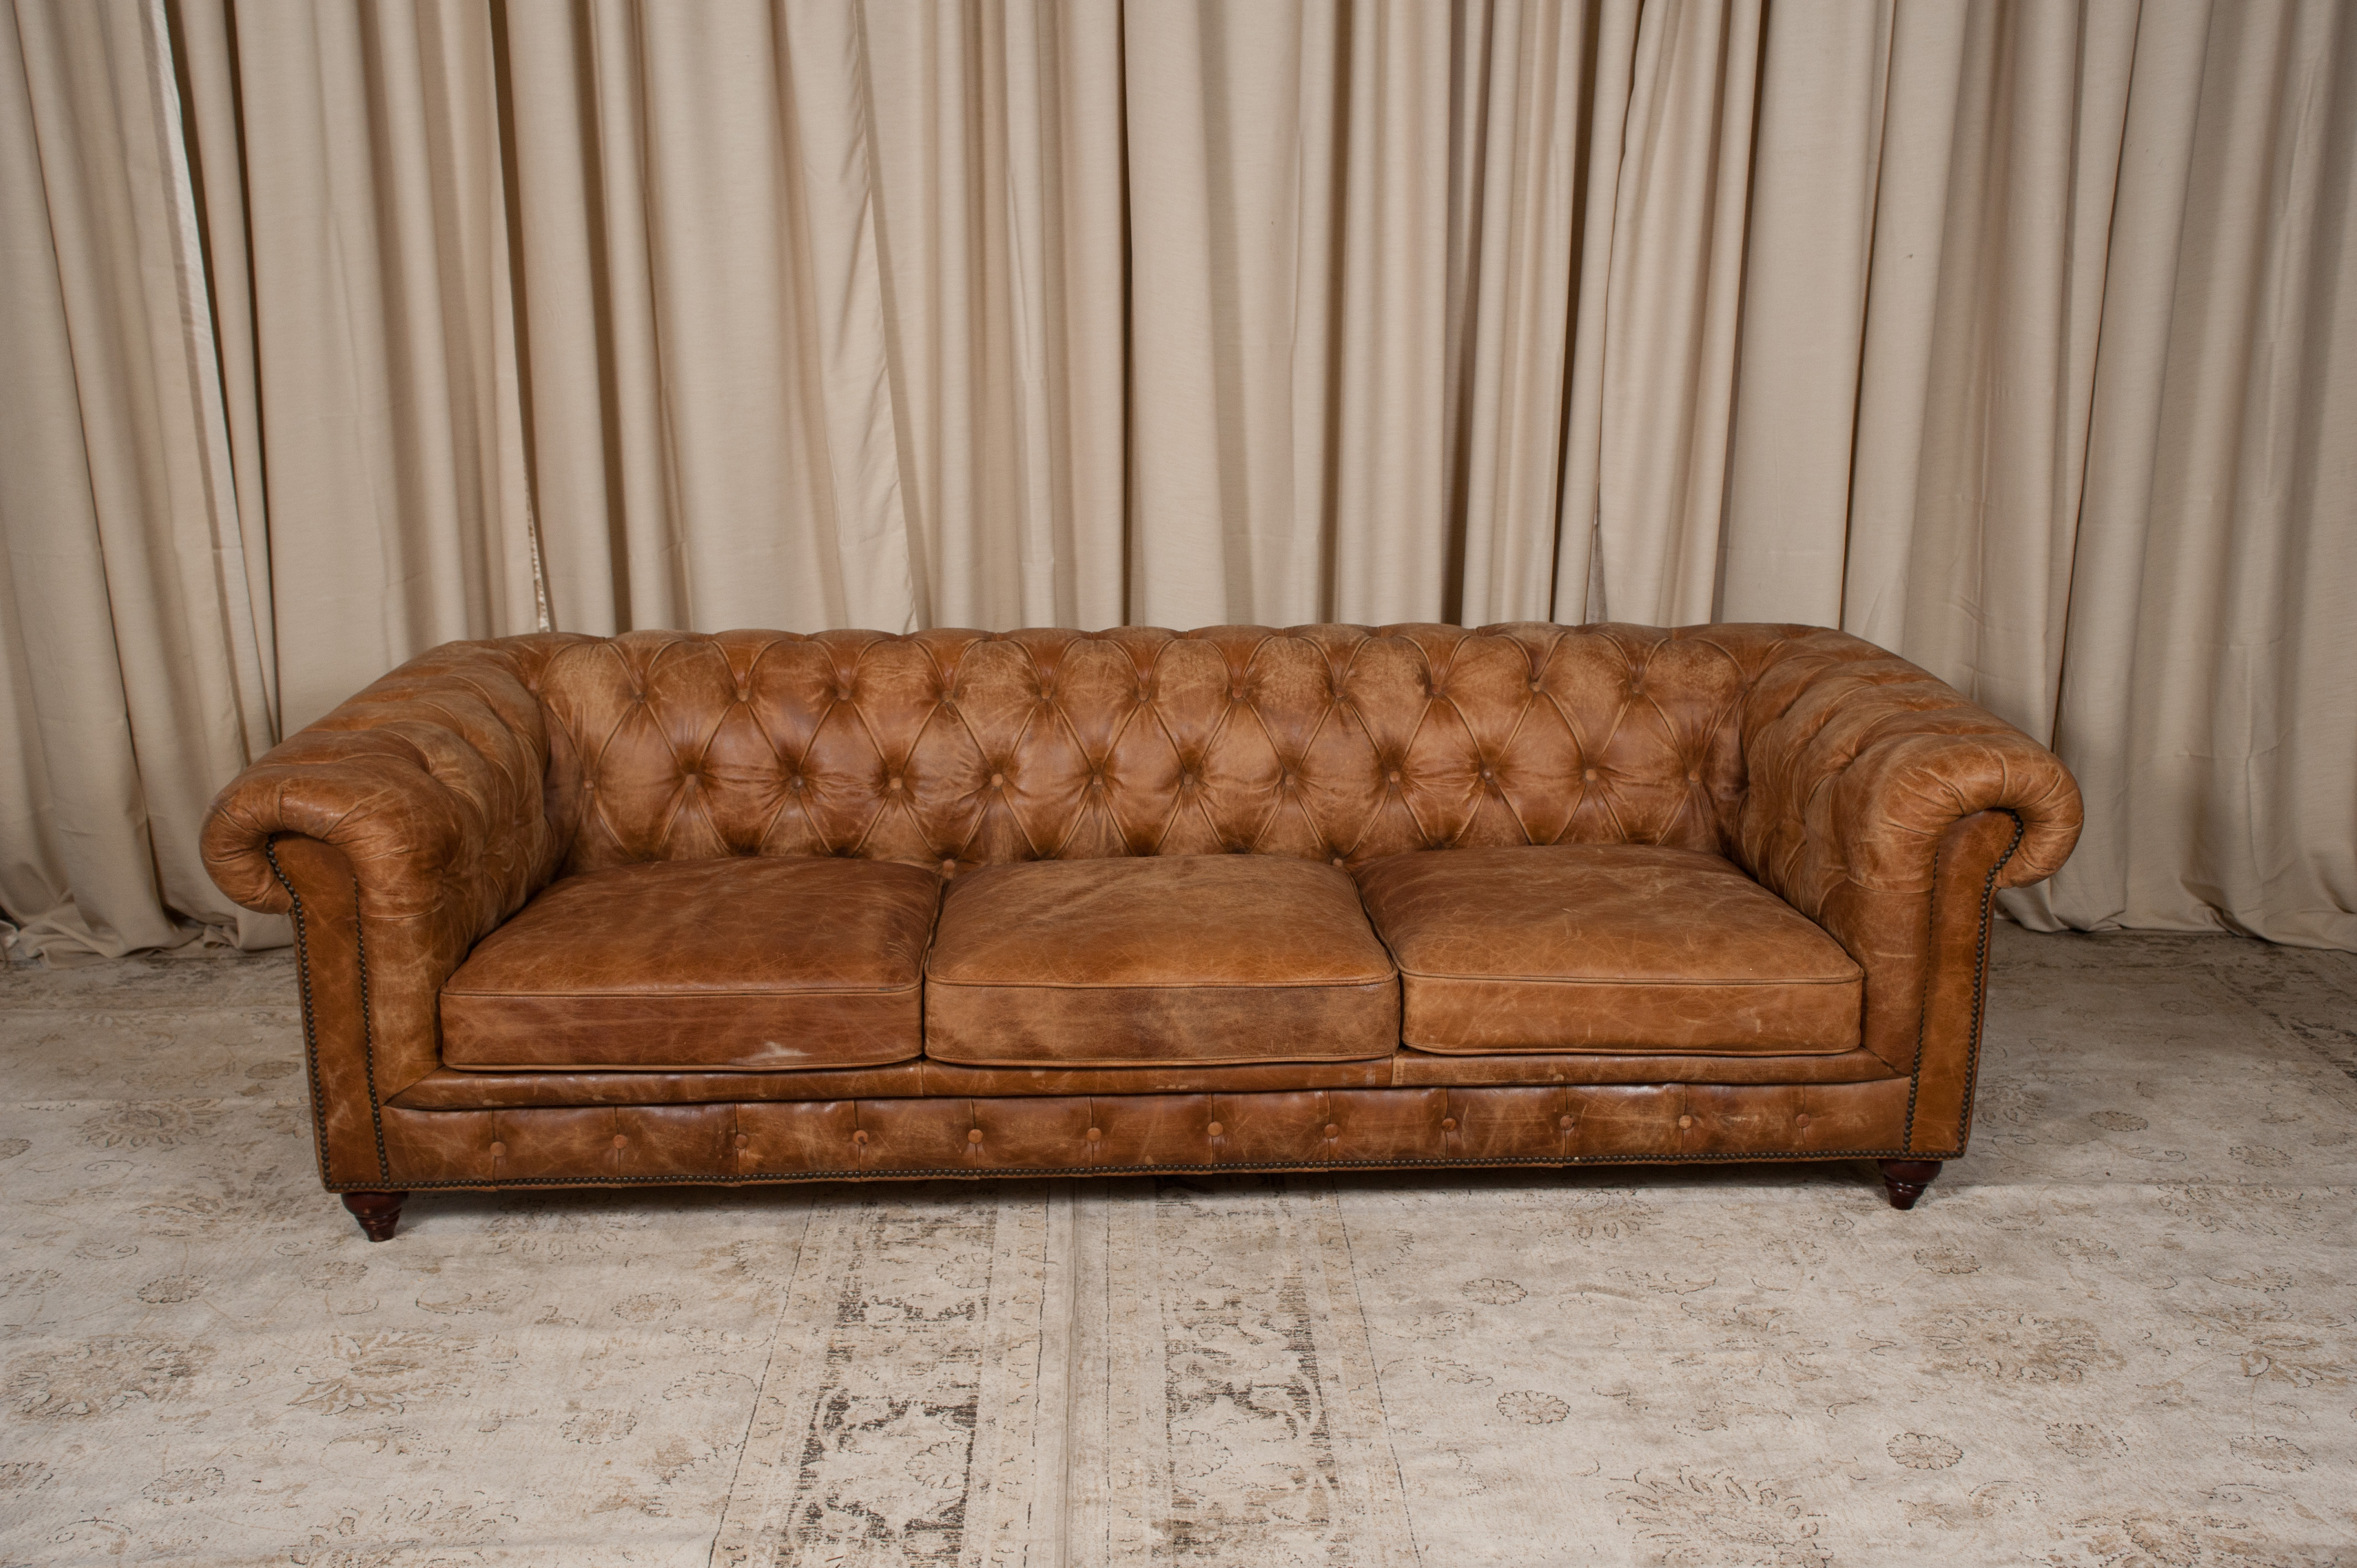 brown leather chesterfield sofa in living room